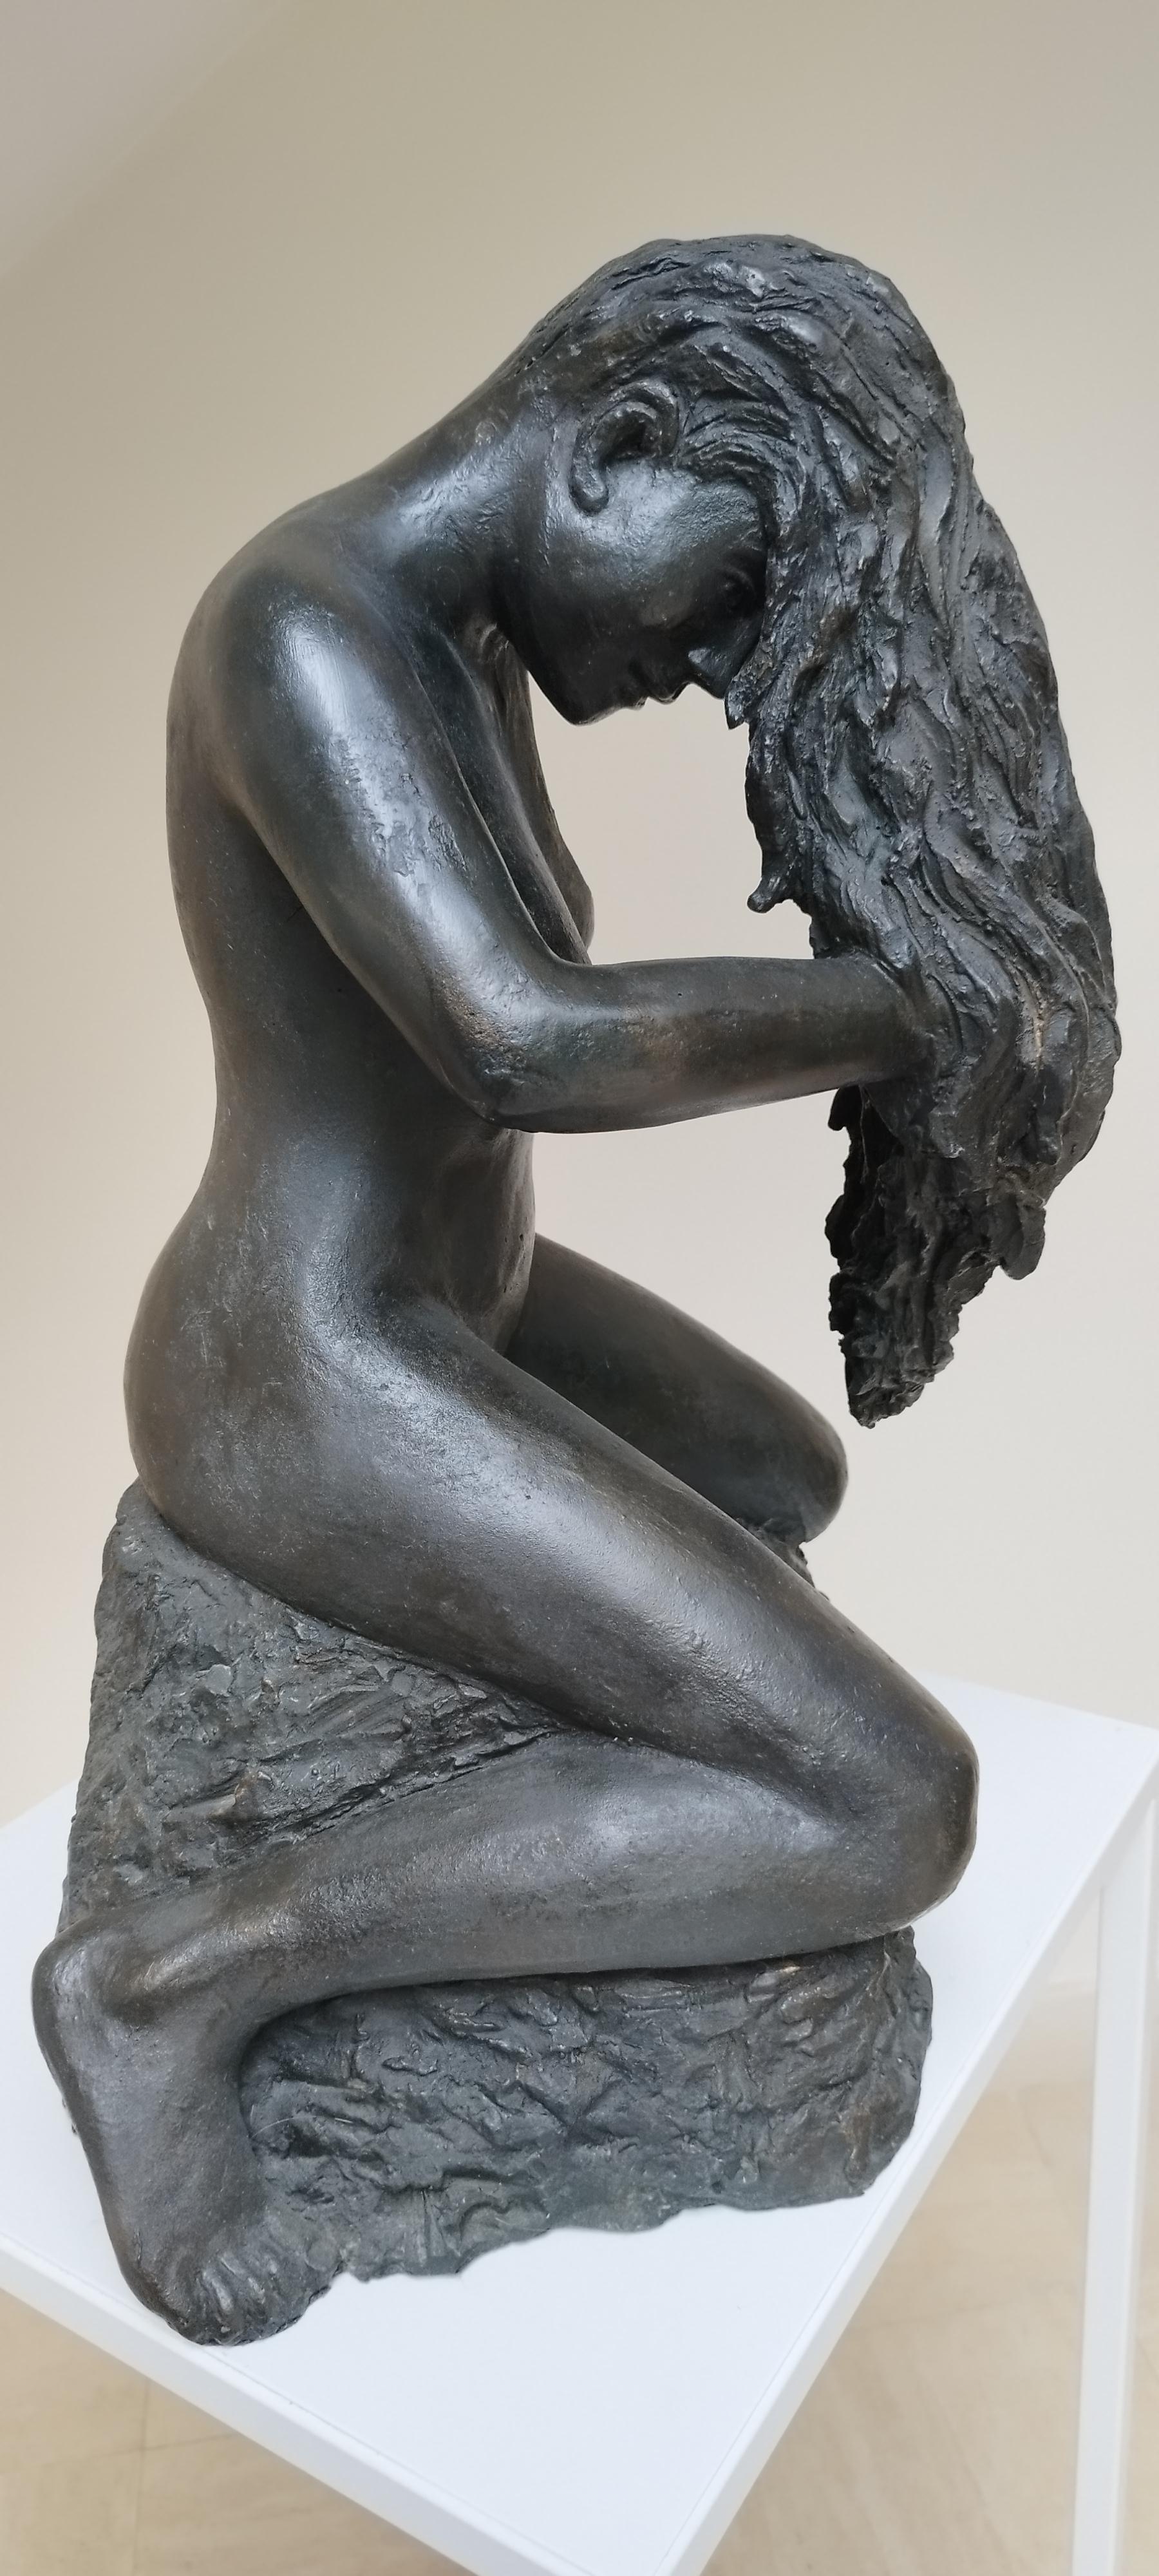 Bronze sculpture created first by hand in clay then in bronze by the sculptor Patrick LAROCHE who obtained the title of 